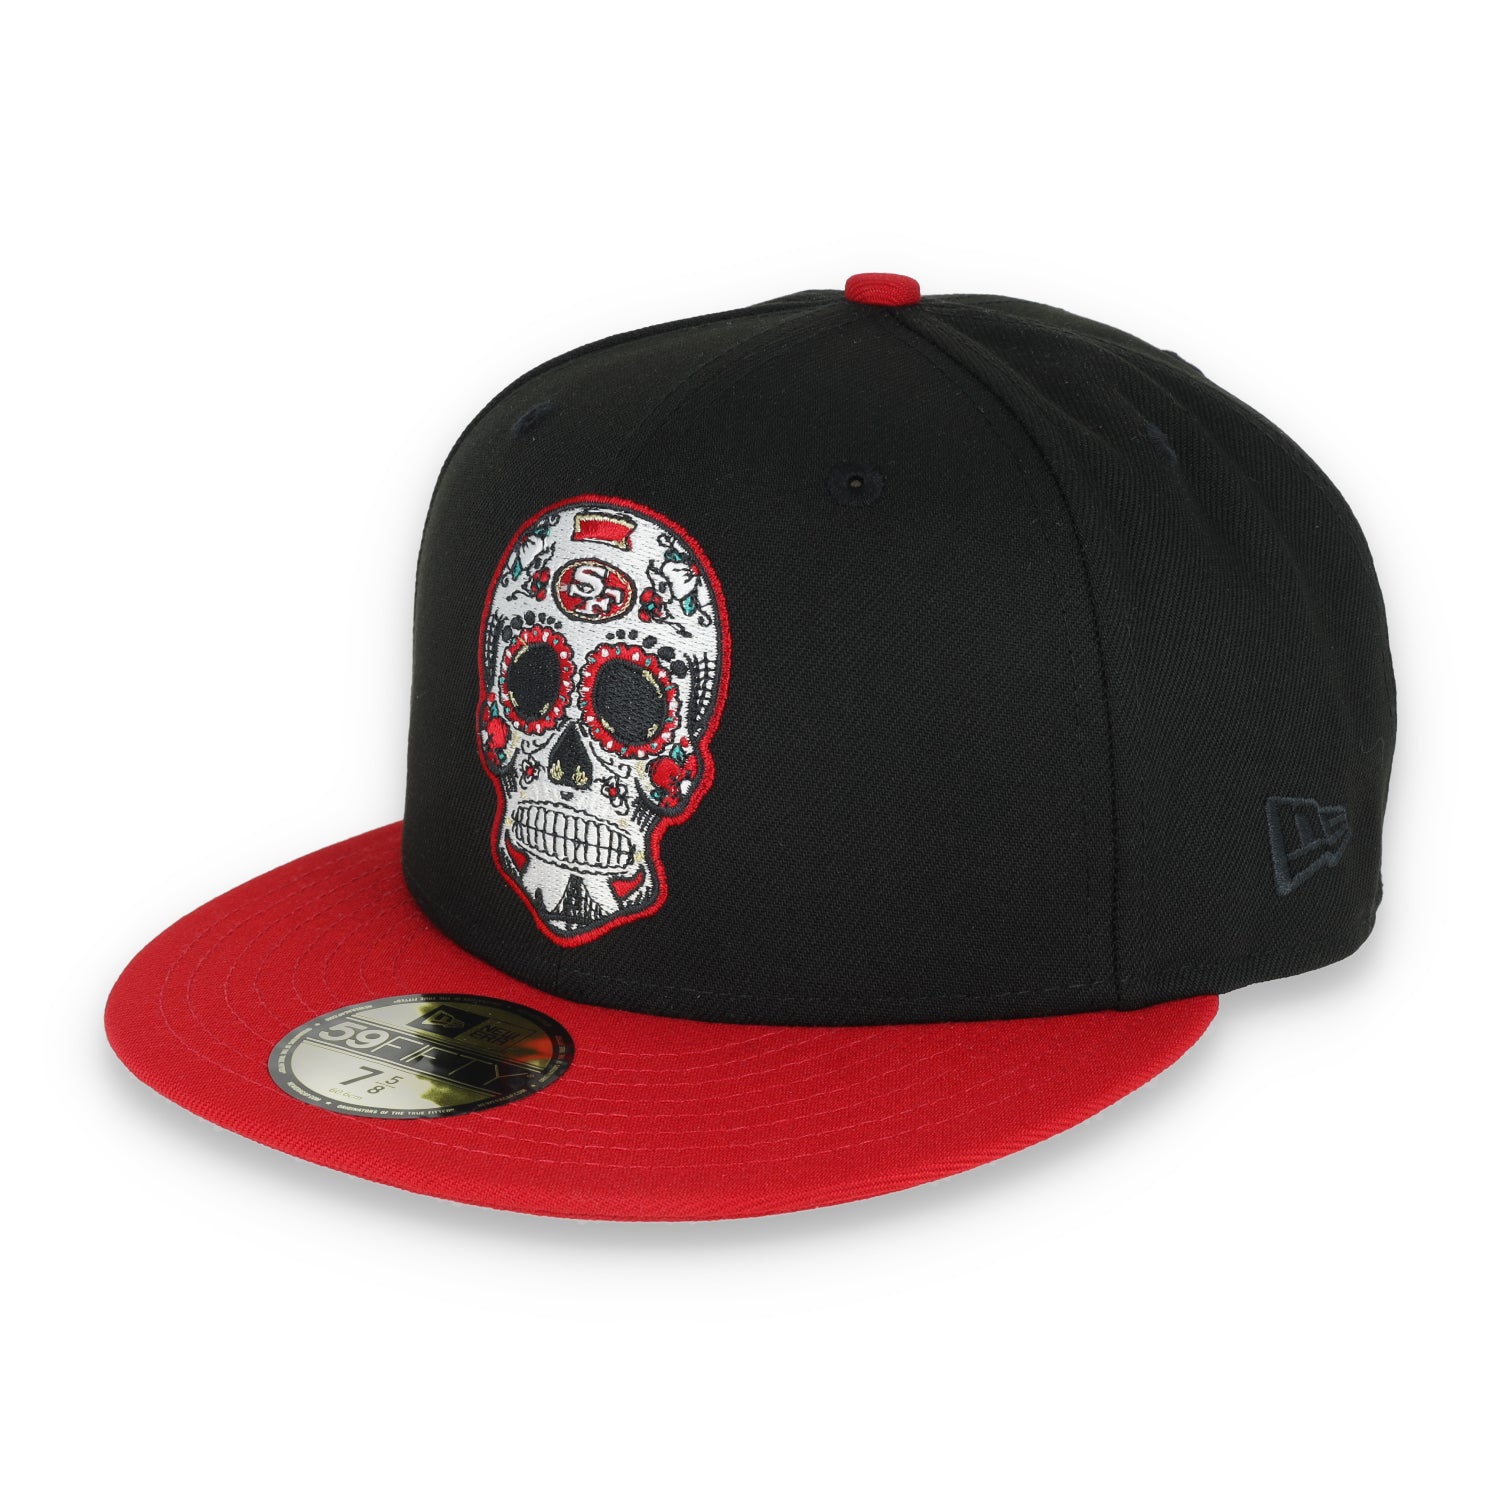 NEW ERA SAN FRANCISCO 49ERS SUGAR SKULL 2-TONE 59FIFTY FITTED HAT-BLACK/Red